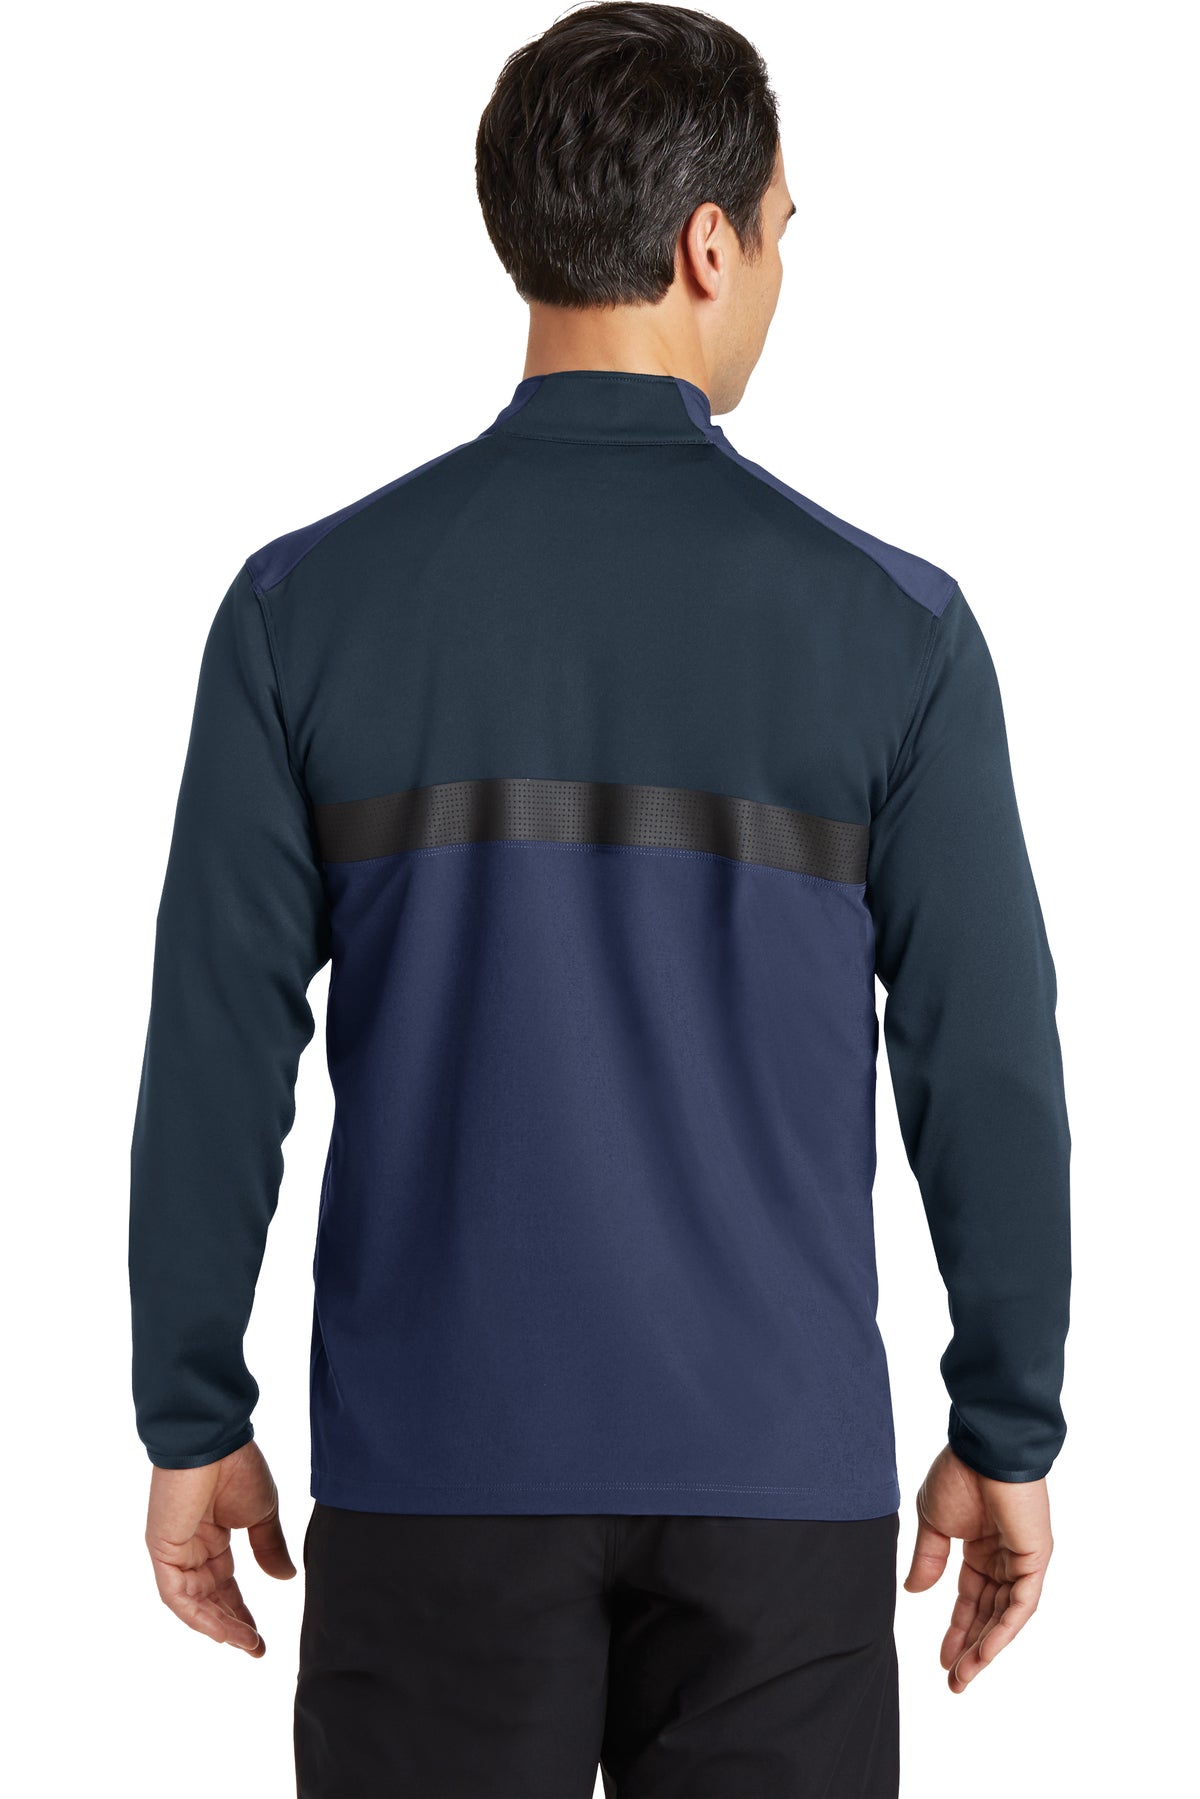 Nike Dri-FIT Fabric Mix 1/2-Zip Cover-Up-3